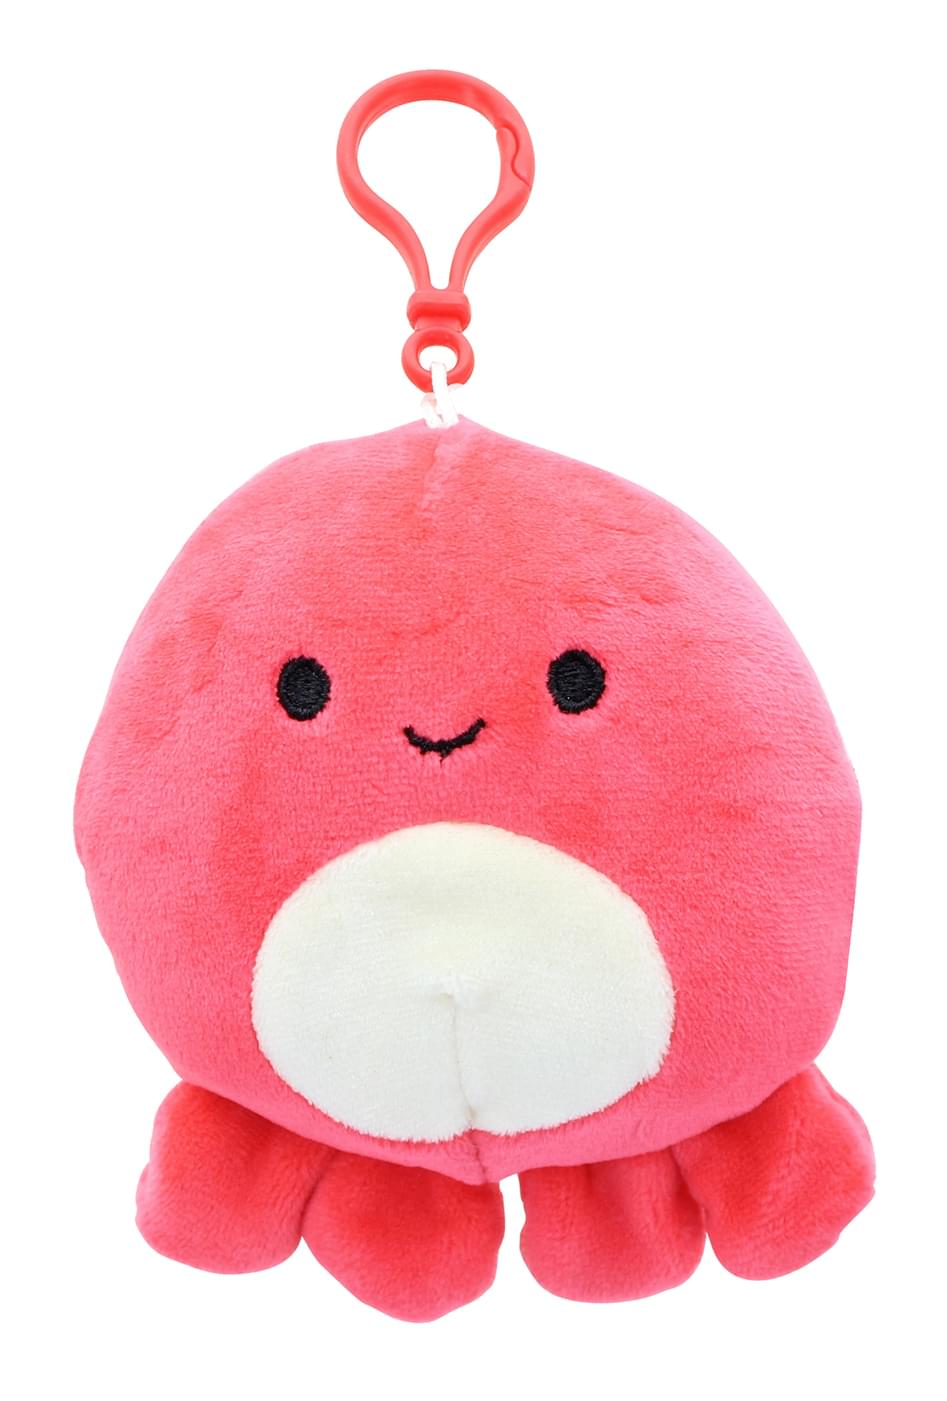 Squishmallow Veronica the Octopus Sealife Plush Toy Clip-On | 3.5 Inches